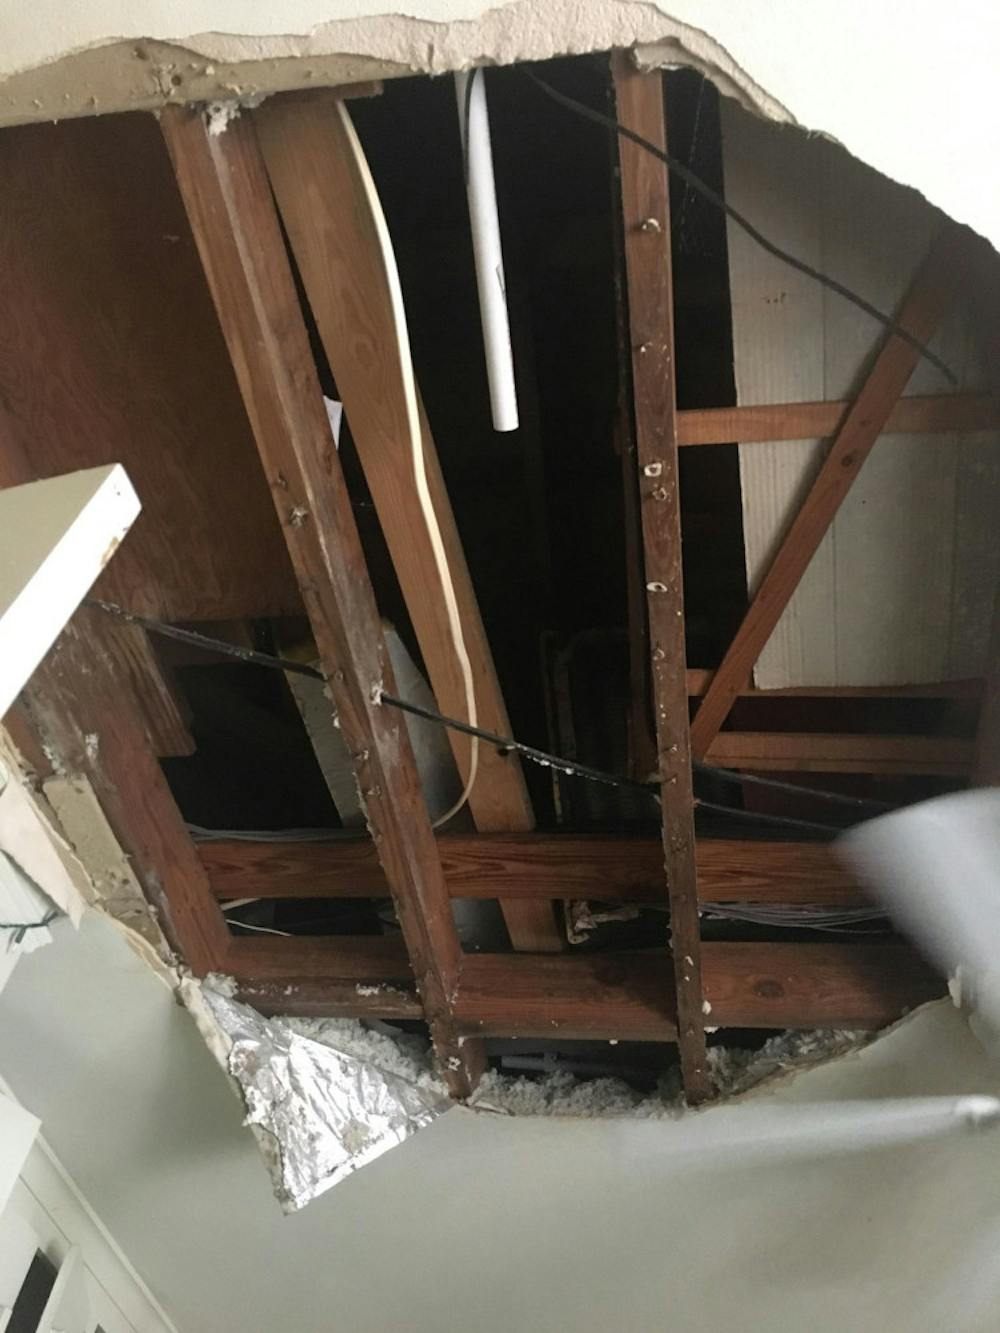 <p><span id="docs-internal-guid-d05f17a5-ea54-556f-579c-222c2f71f43f">The ceiling in a bedroom at College Park Apartments collapsed Wednesday. As of Saturday, nothing had been done.</span></p>